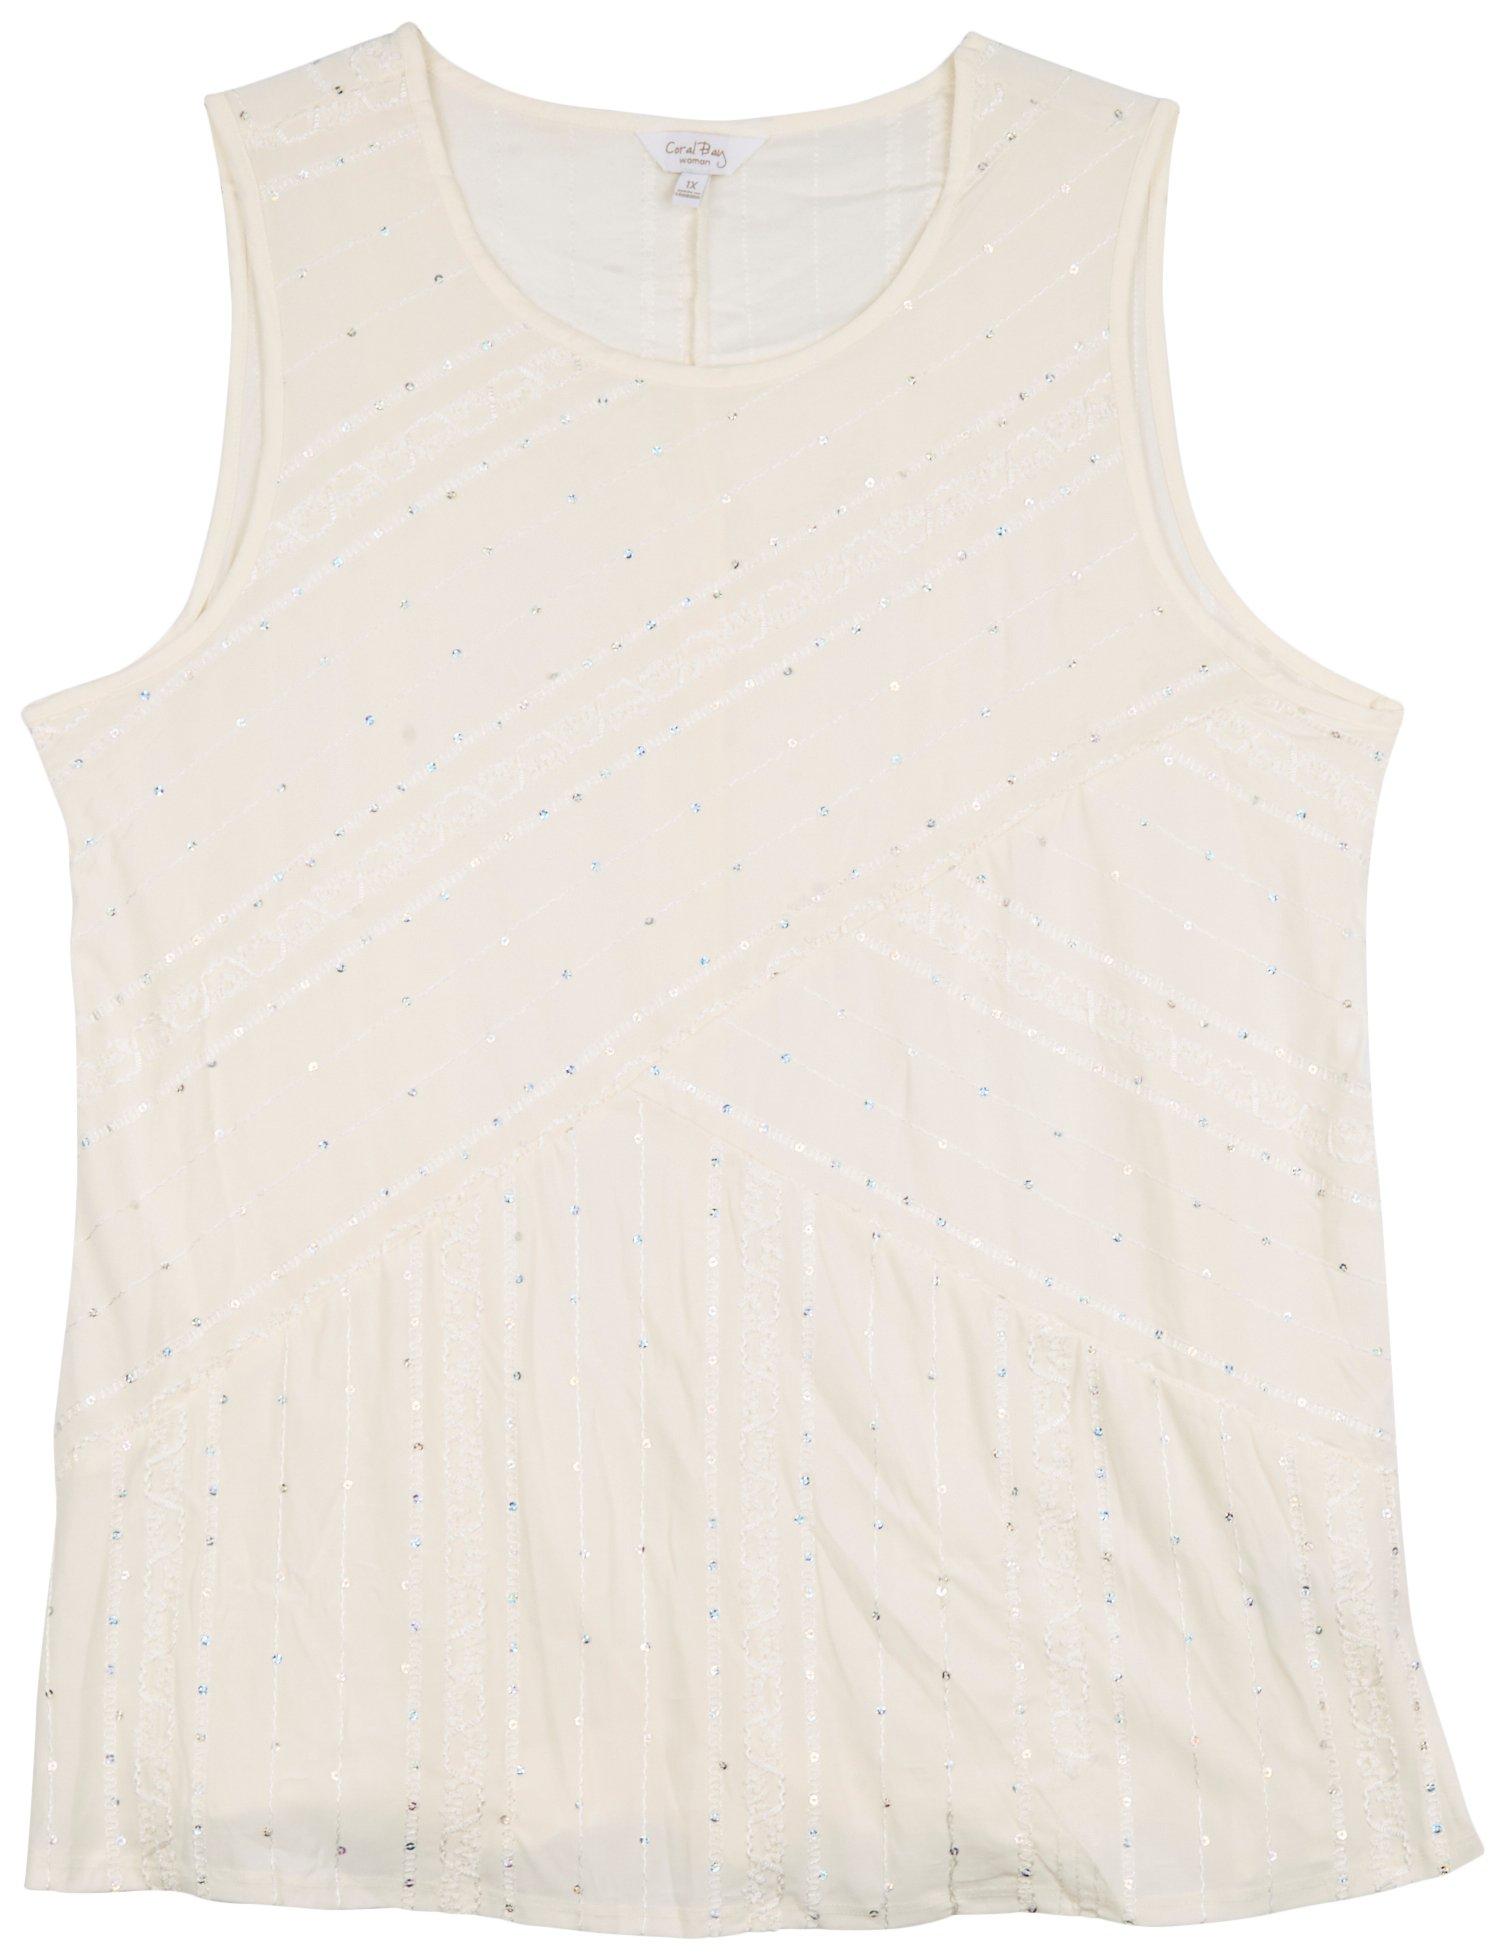 Coral Bay Plus Embellished Sleeveless Top